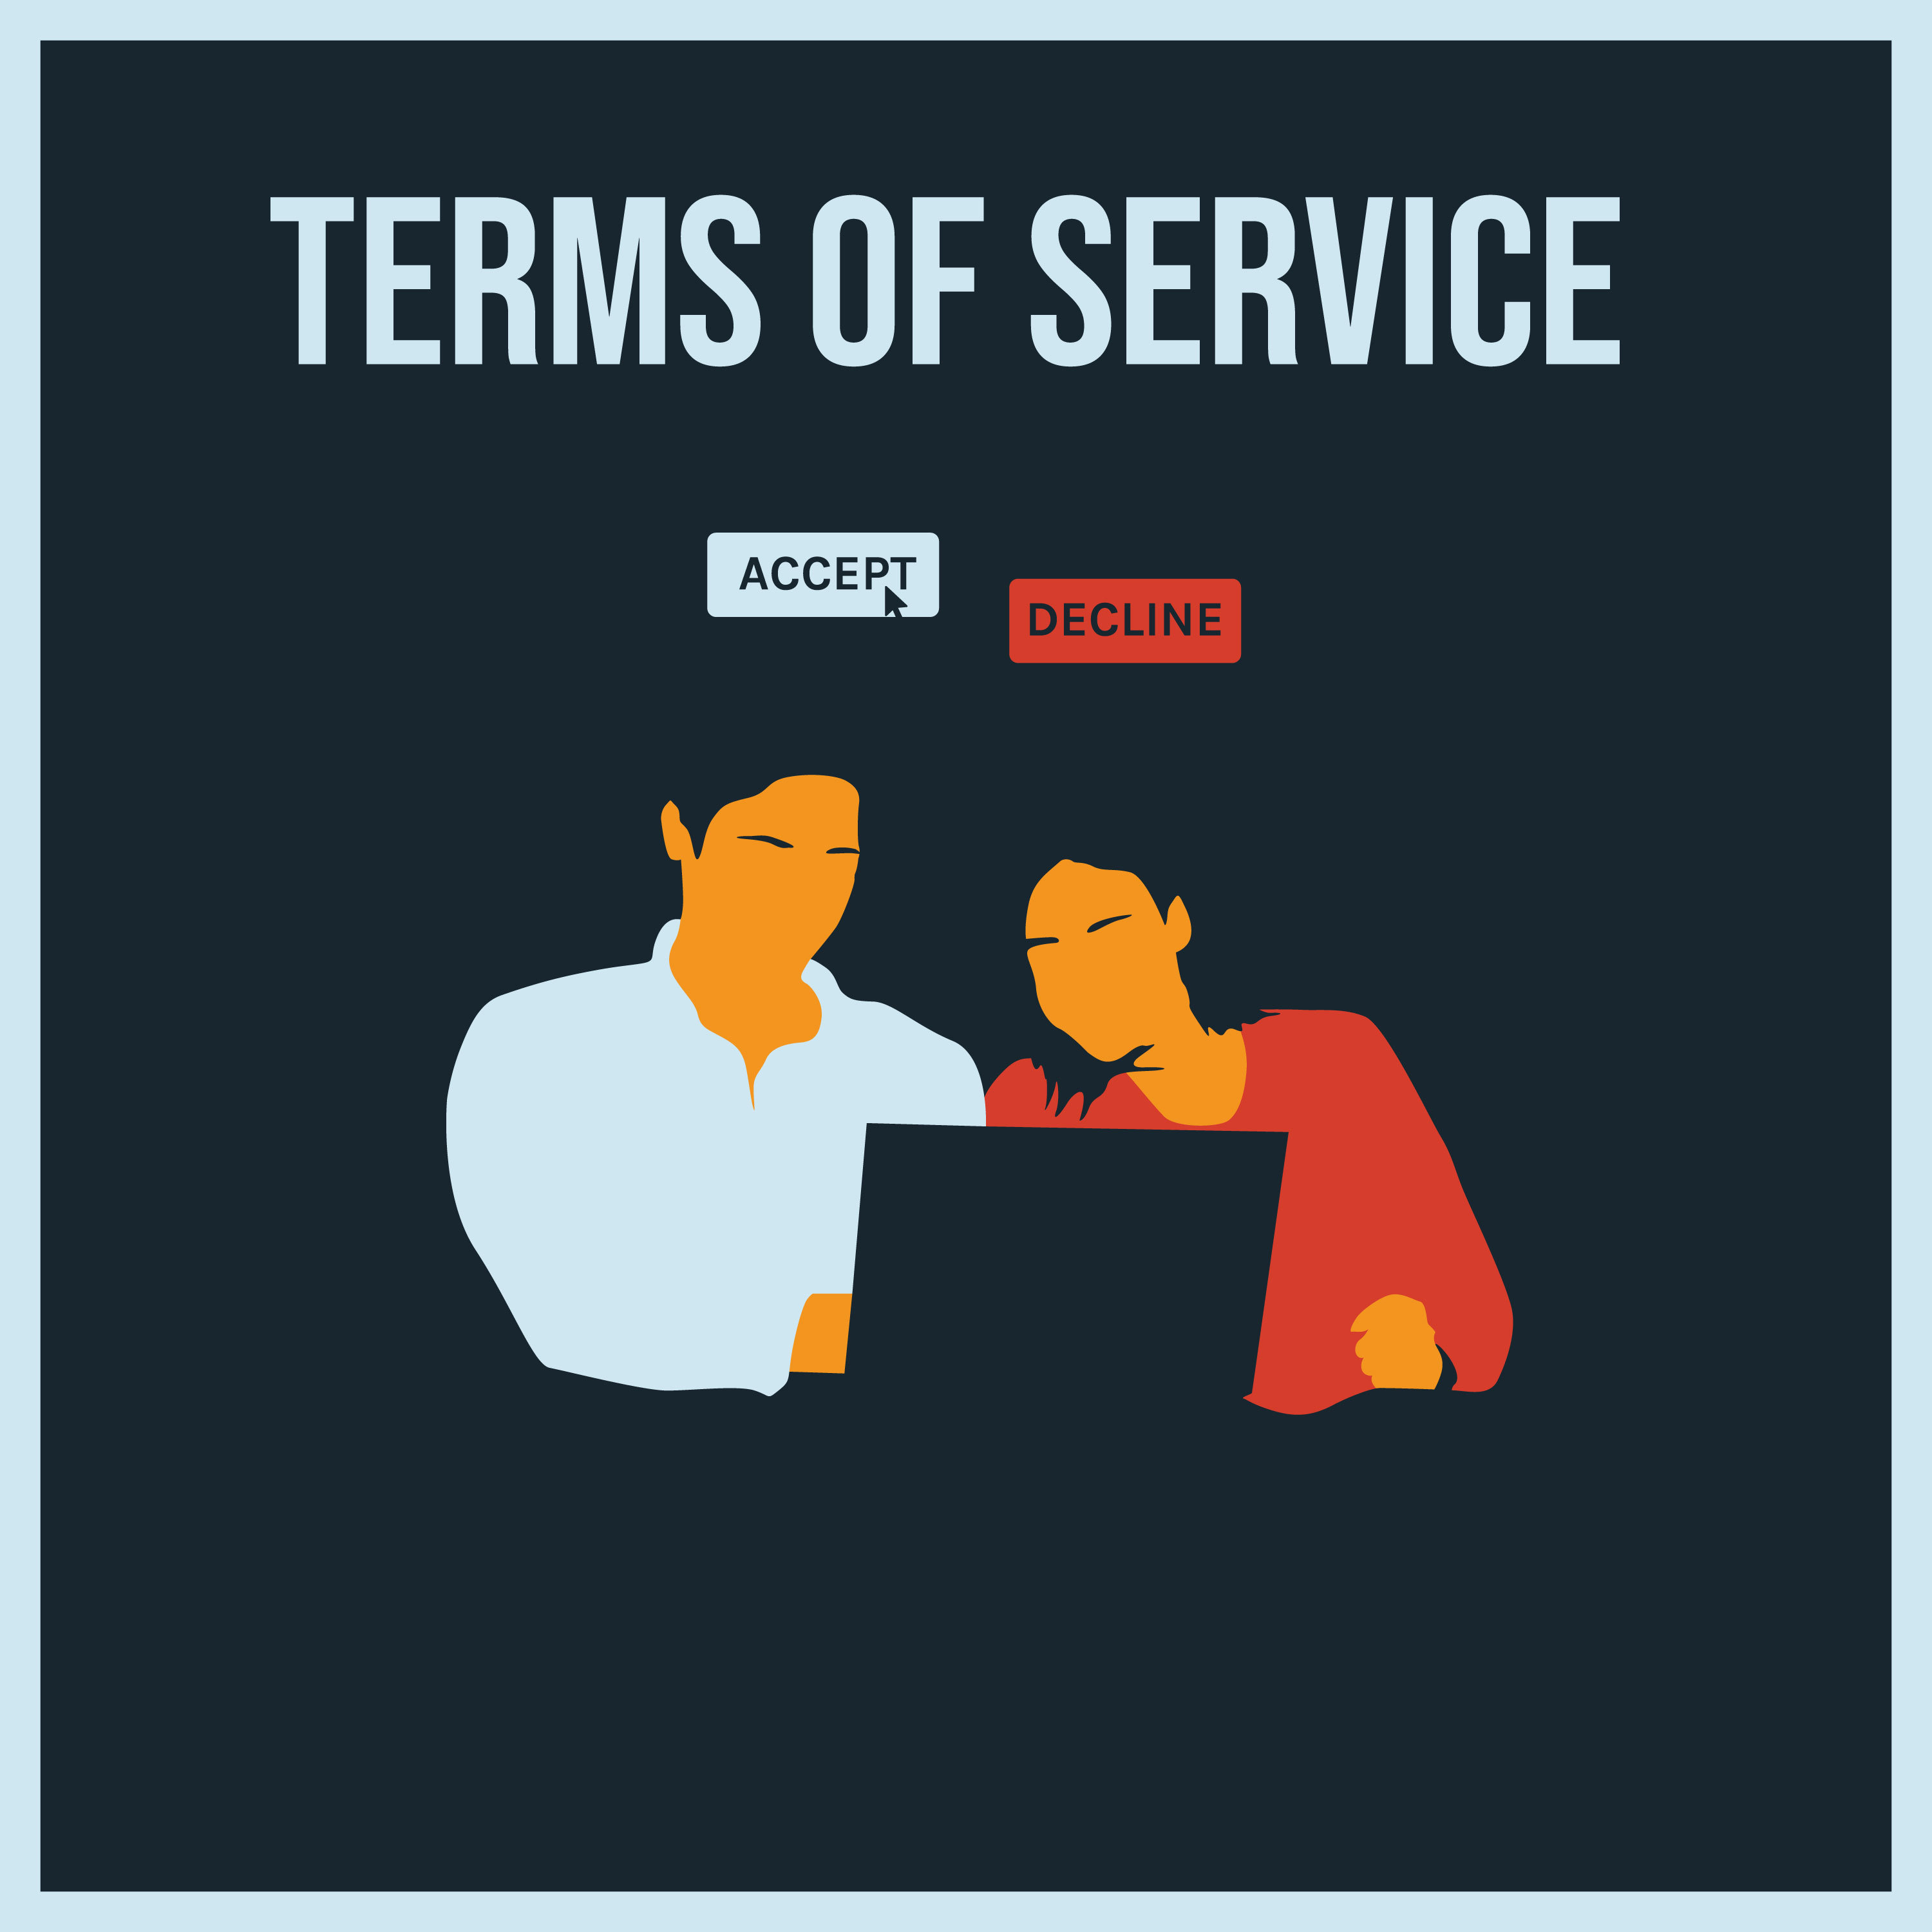 3: Terms of Service